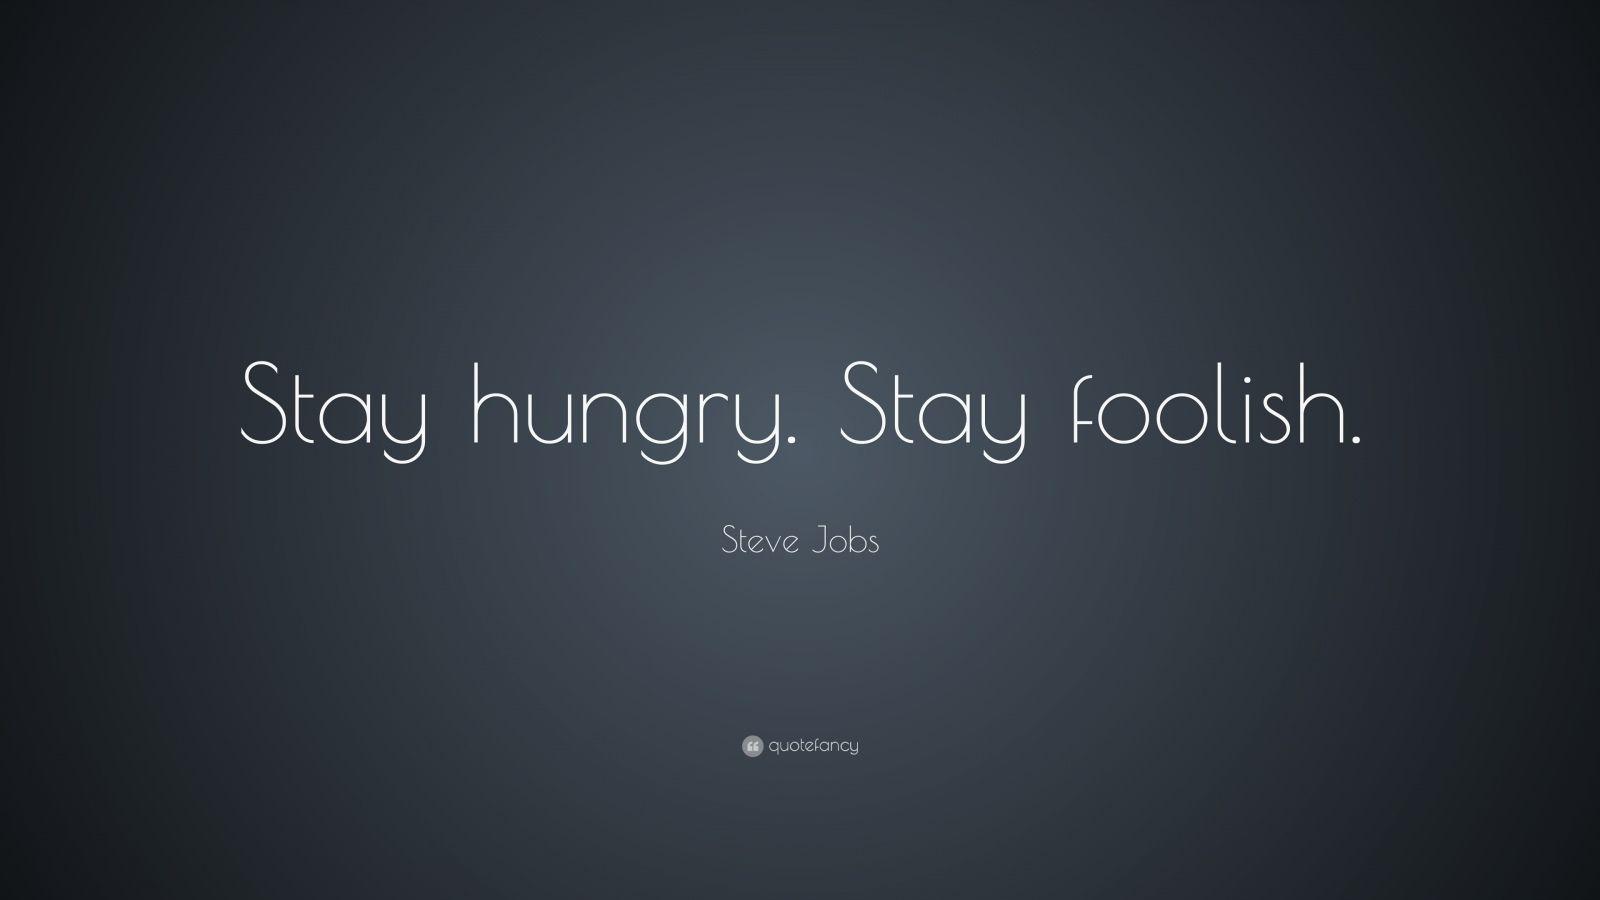 Steve Jobs Quote: “Stay hungry. Stay foolish.”. Quoted